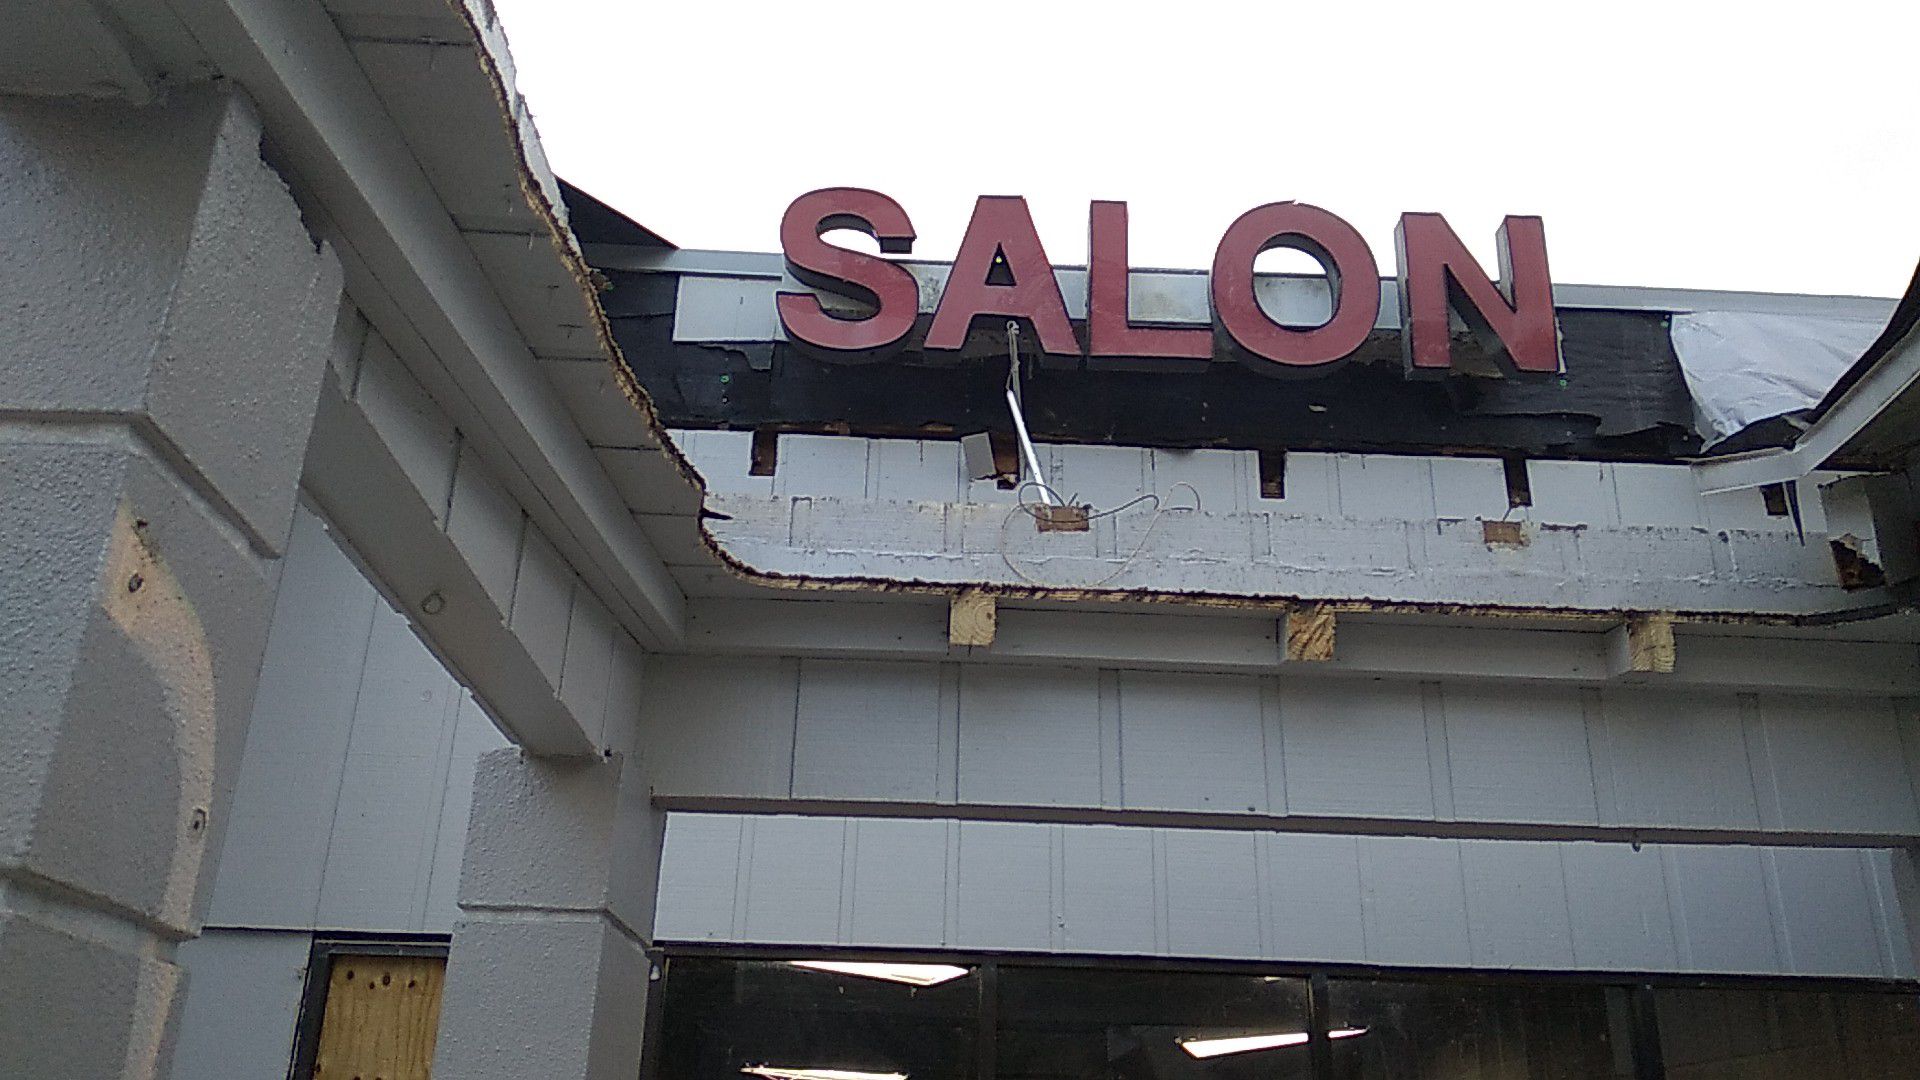 Salon sign ....5 letters work great